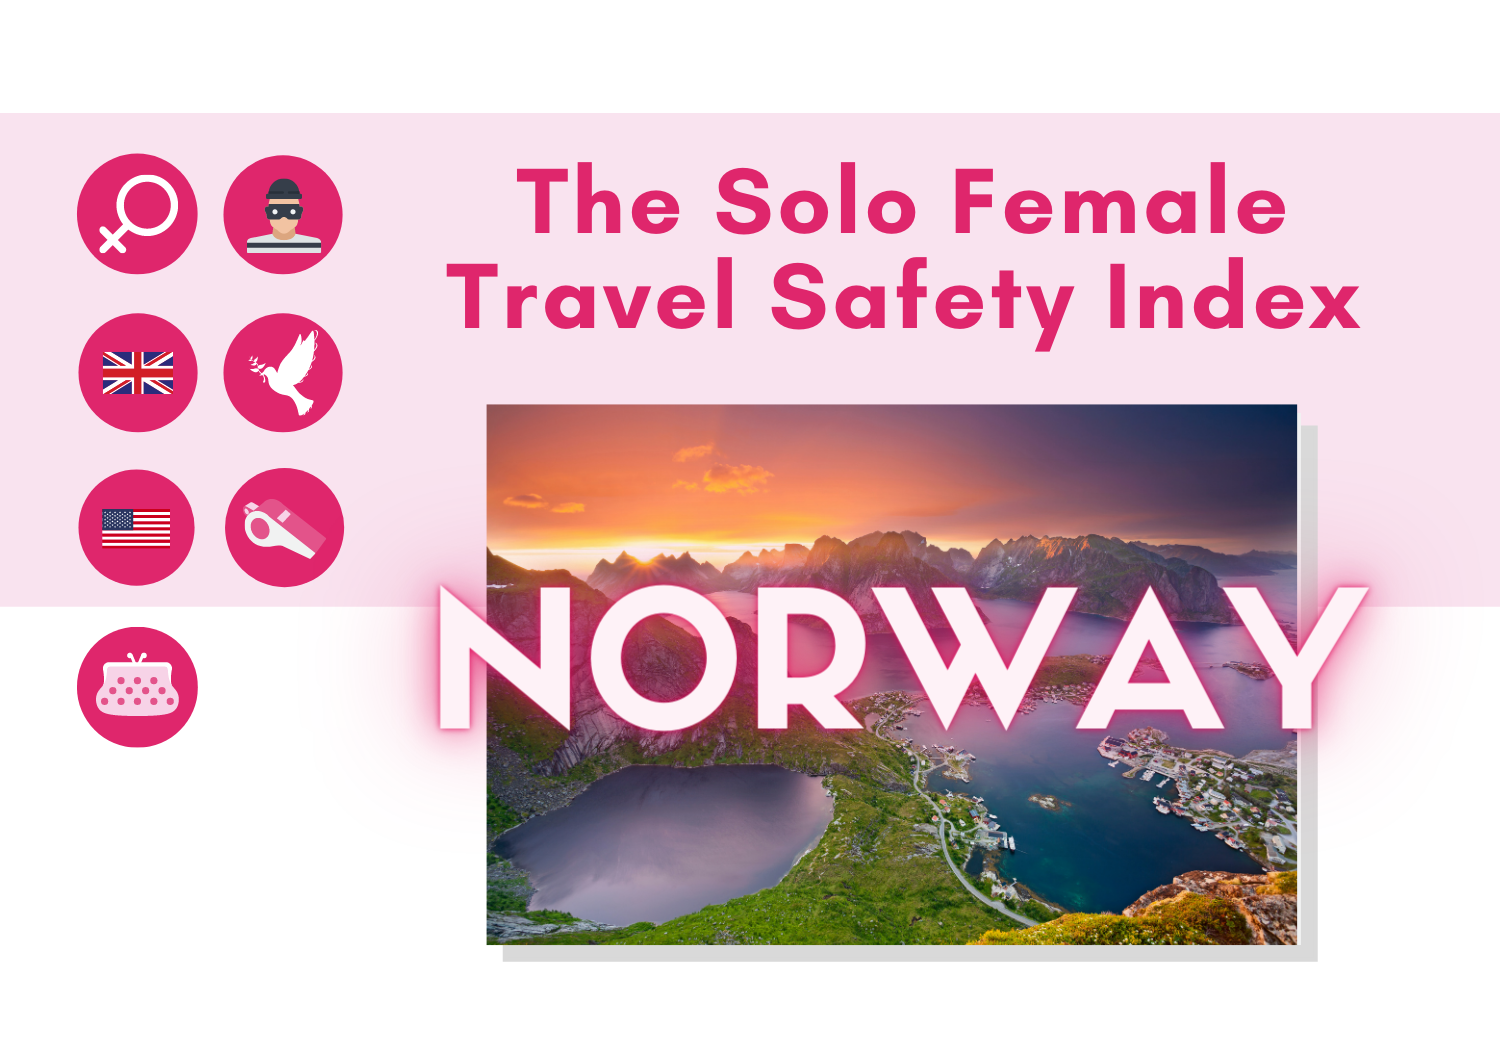 Solo female travel safety in norway